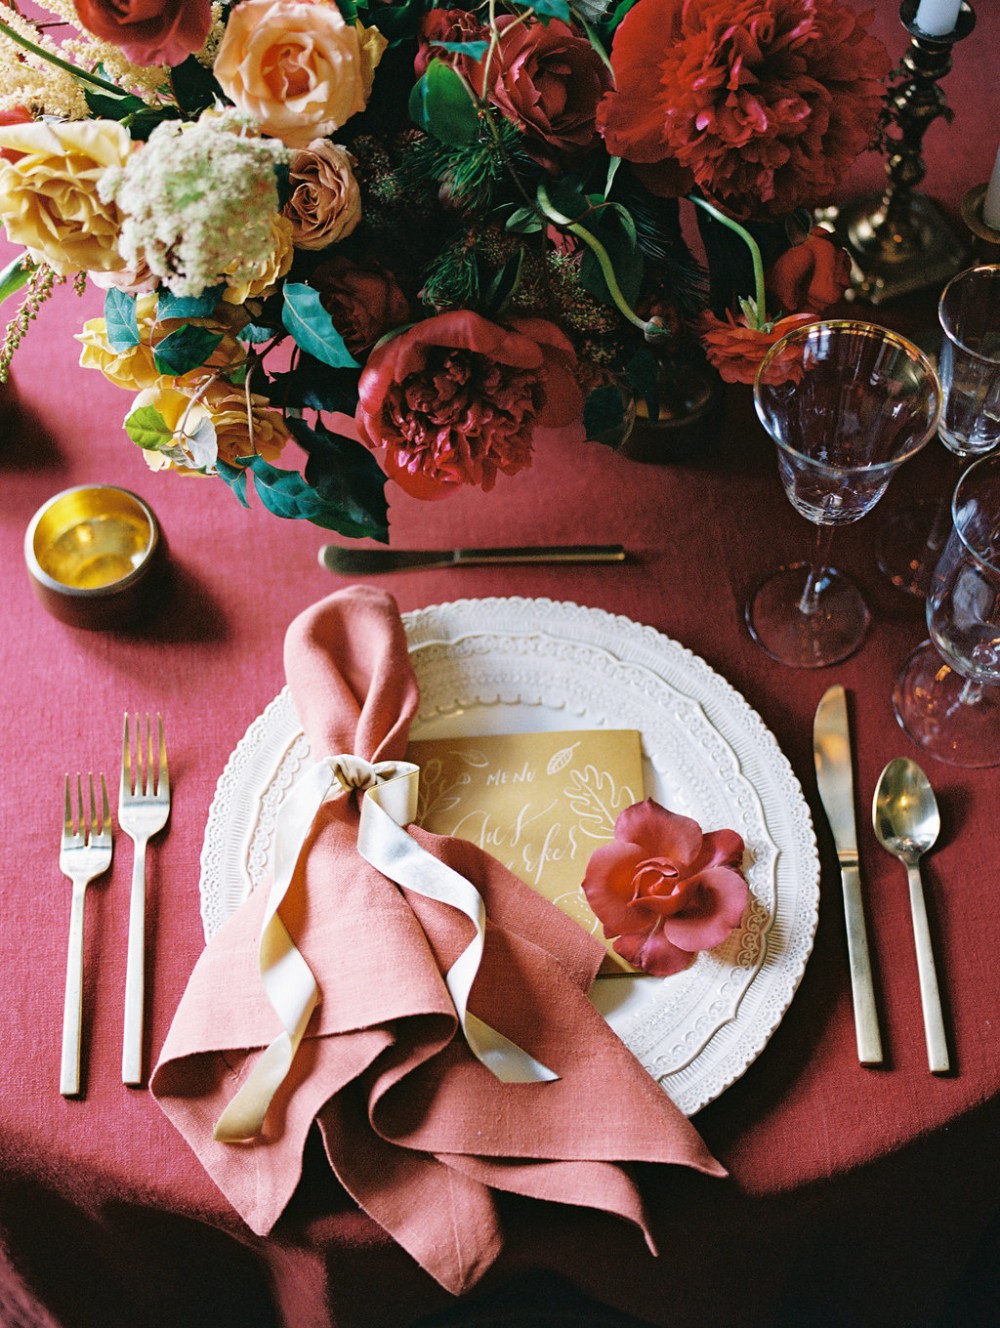 A warm red and orange place setting with a cream charger plate and a mustard yellow meu